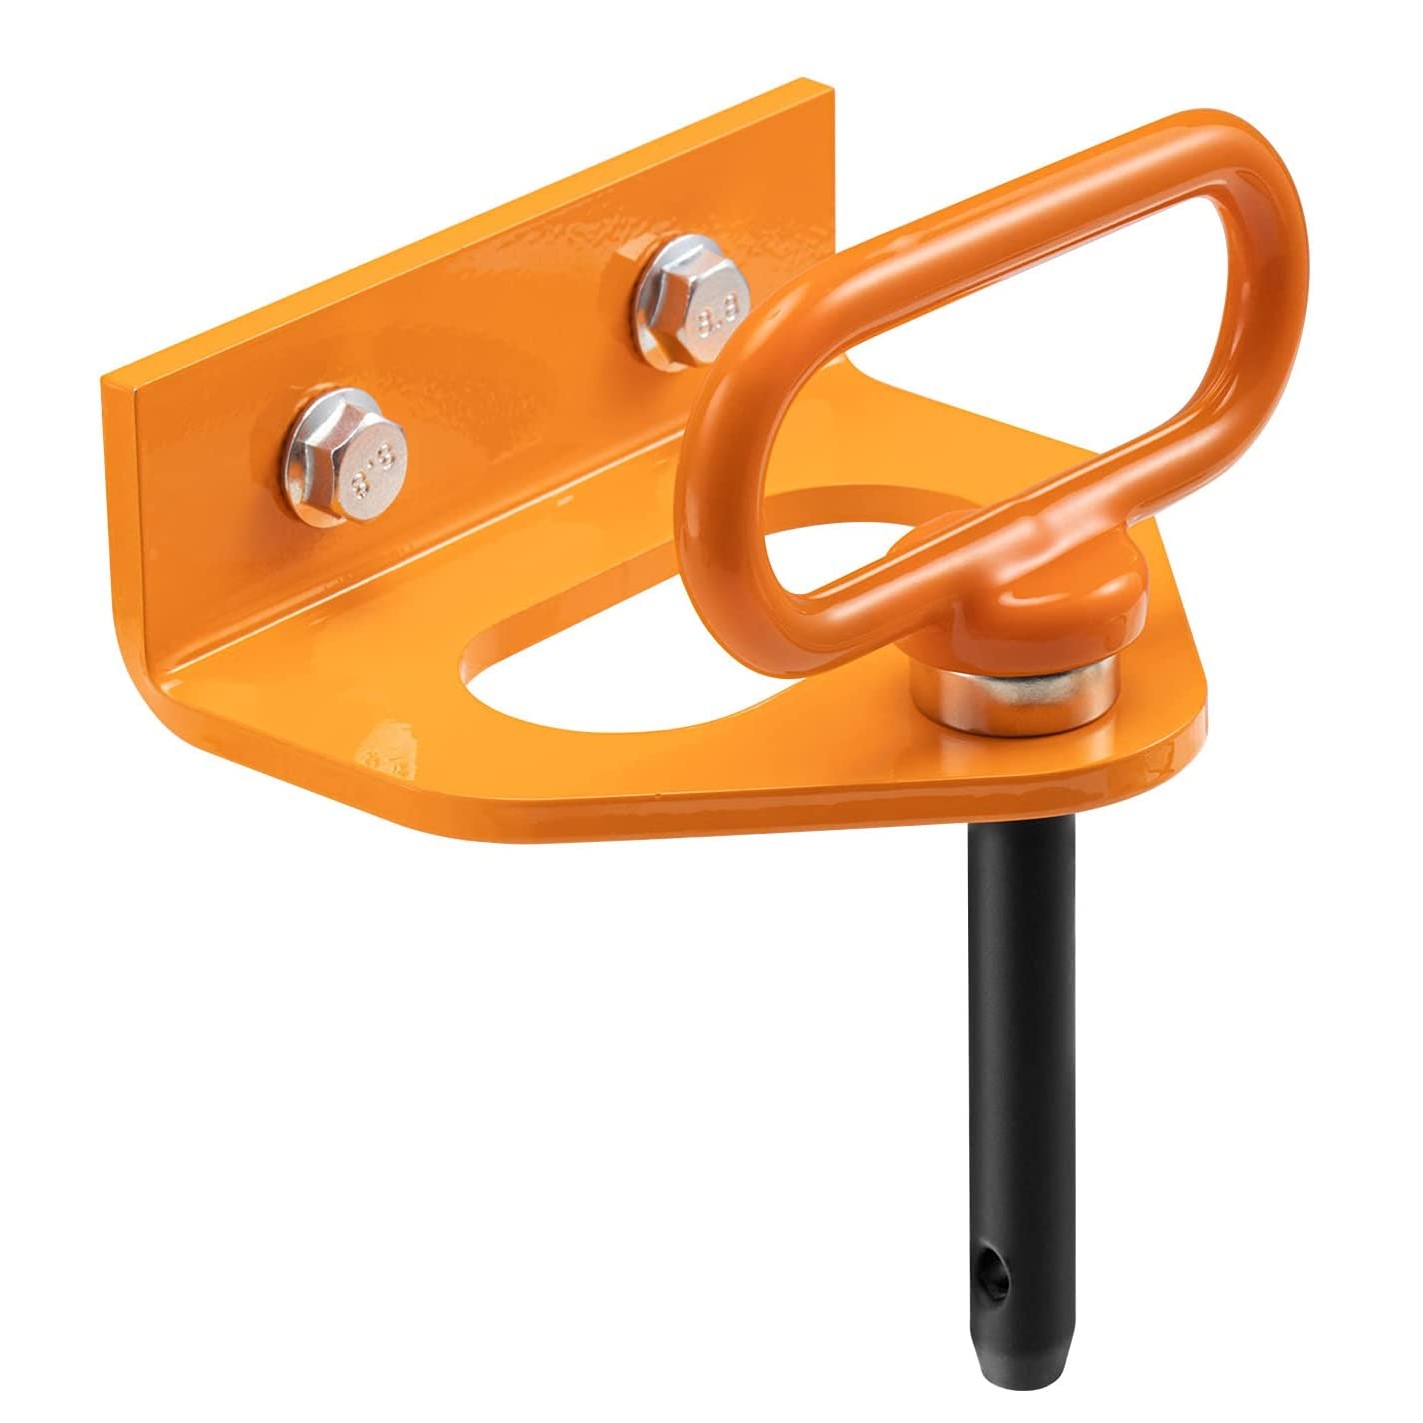 10303A Orange Zero Turn Mower Trailer Hitch & 5/8” Magnetic Hitch Pin Featured Image